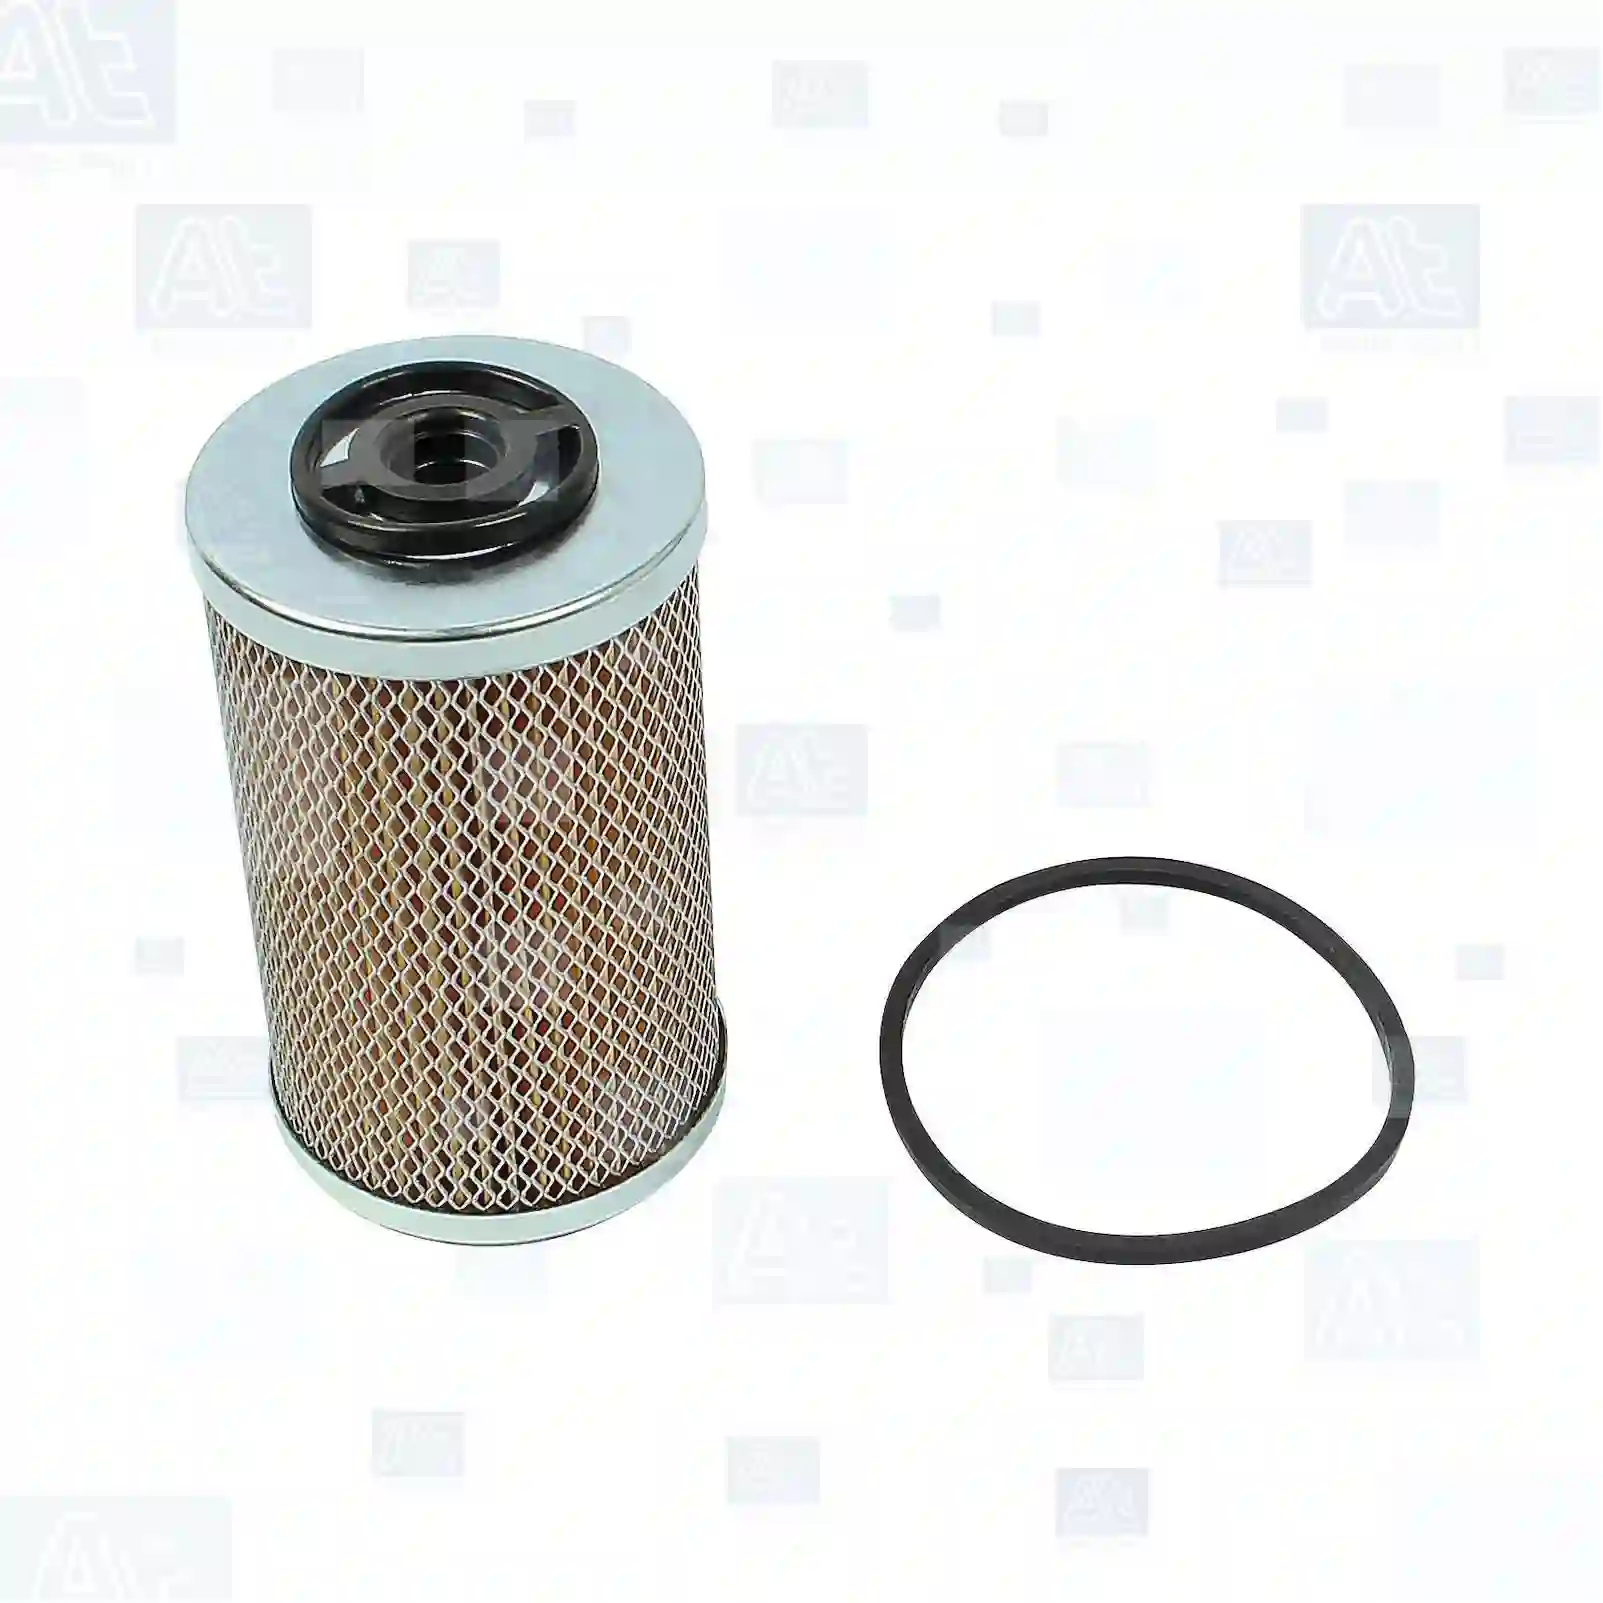 Fuel filter insert, 77723262, 8034700, 52339U, 41028, 41052, 3056982, 3056982R1, 712628, 712628R91, 712629R91, 715711R91, 715712, 715712R91, 716847, 716847R91, 717858R91, 3I-1122, 3I-1587, 8H-4120, 7965458, 7984299, 322405, 3444777215, 4700192, 4770815, 4771015, 4773815, 4774215, 4774715, 4775415, 4775715, 4776415, 4776815, 4776915, 921505, 921905, 9215055, 922305, 922705, 190605, 190607, 0000991050, 0000991051, 0003658350, 65125035003, 0548257, 1500446, 234215, 548247, 548257, 9234125, 9234215, ABU8556, 760590, 76059000, 963304, 96330400, 01160217, 12153152, 605411400002, 605411400501, 605411420002, 8319000104, 4010276340, 2001301, F015200060180, 00178460, 00572879, 00582041, 01160217, 01824101, 01909108, 42522716, 42522761, 8319000104, 1498018, 178459, 17859, 5001783, 5001873, 5002863, 5003946, DNP550060, 7965458, 7984299, 25055364, 7965458, 7984299, 0009839009, 00099839009, 13024119, 130924116, 130924119, 153187002, 2868365M1, 860153187002, 0000226751, 019465, 0226751, 3056982, 3056982R1, 712628, 712628R91, 712629R91, 715711R91, 715712, 715712R91, 716847, 716847R91, 717858R91, 01160217, 42522761, L19927, RE508954, 40700147, 73153, 01160217, 01161735, 01161755, 01170301, 8319000104, 1160217, F545, 243195304, 5602112, 7002305, 2762175014, 276217514, 1082448R92, 81000000244, 81125030001, 81125030014, 81125030015, 81125030016, 81125030020, 81125030036, 81125030040, 81125030041, 81125030051, 1225406, 153187002, 1603209M1, 1630209, 1630209M1, 2001301, 2868365M1, 33002, 620601, 630257, 631227, 655815, 656135, 0000322405, 0000922305, 0000922405, 0004700922, 0004755401, 0004770815, 0004771015, 0004774514, 0004774615, 0004774715, 0004775315, 0004776415, 0004776514, 0004776580, 0004776915, 0004778901, 0010902041, 0153187002, 0153187003, 3440927005, 3440927305, 5984520800, 8319000104, 9451080077, 112482732988, 605411400002, 605411400501, 605411420002, 1225406, 33002, 190604, 190605, 190607, 0000870159, 0000870160, 0008540860, 0008548060, 0008548759, 0008701760, 0008704567, 0008704657, 0048100250, 0048100251, 0087046557, 0807176000, 0854670900, 0870176000, 0870465700, 0875492156, 0904200091, 0904200093, 0904200176, 0904200177, 2085467570, 2085480470, 2087046570, 5000241677, 6005019597, 8548759000, 8701760000, CBO1000, 235301, 2D952446, 00314130, 243195304, 4005010, 8319000104, 1407080132, 1855504, 1885504, 380955164, 407080132, 40708132391, 4070800132, 61100080079, 4010276340, 4011080430, FS16040, 4531002, 233574, 233898, 2338986, 233988, 414383, 4773815, 4774215, 6605860, 66058603, 7133574, 7233574, 76653, 817695, 8176950, 93009905, ZG10178-0008 ||  77723262 At Spare Part | Engine, Accelerator Pedal, Camshaft, Connecting Rod, Crankcase, Crankshaft, Cylinder Head, Engine Suspension Mountings, Exhaust Manifold, Exhaust Gas Recirculation, Filter Kits, Flywheel Housing, General Overhaul Kits, Engine, Intake Manifold, Oil Cleaner, Oil Cooler, Oil Filter, Oil Pump, Oil Sump, Piston & Liner, Sensor & Switch, Timing Case, Turbocharger, Cooling System, Belt Tensioner, Coolant Filter, Coolant Pipe, Corrosion Prevention Agent, Drive, Expansion Tank, Fan, Intercooler, Monitors & Gauges, Radiator, Thermostat, V-Belt / Timing belt, Water Pump, Fuel System, Electronical Injector Unit, Feed Pump, Fuel Filter, cpl., Fuel Gauge Sender,  Fuel Line, Fuel Pump, Fuel Tank, Injection Line Kit, Injection Pump, Exhaust System, Clutch & Pedal, Gearbox, Propeller Shaft, Axles, Brake System, Hubs & Wheels, Suspension, Leaf Spring, Universal Parts / Accessories, Steering, Electrical System, Cabin Fuel filter insert, 77723262, 8034700, 52339U, 41028, 41052, 3056982, 3056982R1, 712628, 712628R91, 712629R91, 715711R91, 715712, 715712R91, 716847, 716847R91, 717858R91, 3I-1122, 3I-1587, 8H-4120, 7965458, 7984299, 322405, 3444777215, 4700192, 4770815, 4771015, 4773815, 4774215, 4774715, 4775415, 4775715, 4776415, 4776815, 4776915, 921505, 921905, 9215055, 922305, 922705, 190605, 190607, 0000991050, 0000991051, 0003658350, 65125035003, 0548257, 1500446, 234215, 548247, 548257, 9234125, 9234215, ABU8556, 760590, 76059000, 963304, 96330400, 01160217, 12153152, 605411400002, 605411400501, 605411420002, 8319000104, 4010276340, 2001301, F015200060180, 00178460, 00572879, 00582041, 01160217, 01824101, 01909108, 42522716, 42522761, 8319000104, 1498018, 178459, 17859, 5001783, 5001873, 5002863, 5003946, DNP550060, 7965458, 7984299, 25055364, 7965458, 7984299, 0009839009, 00099839009, 13024119, 130924116, 130924119, 153187002, 2868365M1, 860153187002, 0000226751, 019465, 0226751, 3056982, 3056982R1, 712628, 712628R91, 712629R91, 715711R91, 715712, 715712R91, 716847, 716847R91, 717858R91, 01160217, 42522761, L19927, RE508954, 40700147, 73153, 01160217, 01161735, 01161755, 01170301, 8319000104, 1160217, F545, 243195304, 5602112, 7002305, 2762175014, 276217514, 1082448R92, 81000000244, 81125030001, 81125030014, 81125030015, 81125030016, 81125030020, 81125030036, 81125030040, 81125030041, 81125030051, 1225406, 153187002, 1603209M1, 1630209, 1630209M1, 2001301, 2868365M1, 33002, 620601, 630257, 631227, 655815, 656135, 0000322405, 0000922305, 0000922405, 0004700922, 0004755401, 0004770815, 0004771015, 0004774514, 0004774615, 0004774715, 0004775315, 0004776415, 0004776514, 0004776580, 0004776915, 0004778901, 0010902041, 0153187002, 0153187003, 3440927005, 3440927305, 5984520800, 8319000104, 9451080077, 112482732988, 605411400002, 605411400501, 605411420002, 1225406, 33002, 190604, 190605, 190607, 0000870159, 0000870160, 0008540860, 0008548060, 0008548759, 0008701760, 0008704567, 0008704657, 0048100250, 0048100251, 0087046557, 0807176000, 0854670900, 0870176000, 0870465700, 0875492156, 0904200091, 0904200093, 0904200176, 0904200177, 2085467570, 2085480470, 2087046570, 5000241677, 6005019597, 8548759000, 8701760000, CBO1000, 235301, 2D952446, 00314130, 243195304, 4005010, 8319000104, 1407080132, 1855504, 1885504, 380955164, 407080132, 40708132391, 4070800132, 61100080079, 4010276340, 4011080430, FS16040, 4531002, 233574, 233898, 2338986, 233988, 414383, 4773815, 4774215, 6605860, 66058603, 7133574, 7233574, 76653, 817695, 8176950, 93009905, ZG10178-0008 ||  77723262 At Spare Part | Engine, Accelerator Pedal, Camshaft, Connecting Rod, Crankcase, Crankshaft, Cylinder Head, Engine Suspension Mountings, Exhaust Manifold, Exhaust Gas Recirculation, Filter Kits, Flywheel Housing, General Overhaul Kits, Engine, Intake Manifold, Oil Cleaner, Oil Cooler, Oil Filter, Oil Pump, Oil Sump, Piston & Liner, Sensor & Switch, Timing Case, Turbocharger, Cooling System, Belt Tensioner, Coolant Filter, Coolant Pipe, Corrosion Prevention Agent, Drive, Expansion Tank, Fan, Intercooler, Monitors & Gauges, Radiator, Thermostat, V-Belt / Timing belt, Water Pump, Fuel System, Electronical Injector Unit, Feed Pump, Fuel Filter, cpl., Fuel Gauge Sender,  Fuel Line, Fuel Pump, Fuel Tank, Injection Line Kit, Injection Pump, Exhaust System, Clutch & Pedal, Gearbox, Propeller Shaft, Axles, Brake System, Hubs & Wheels, Suspension, Leaf Spring, Universal Parts / Accessories, Steering, Electrical System, Cabin